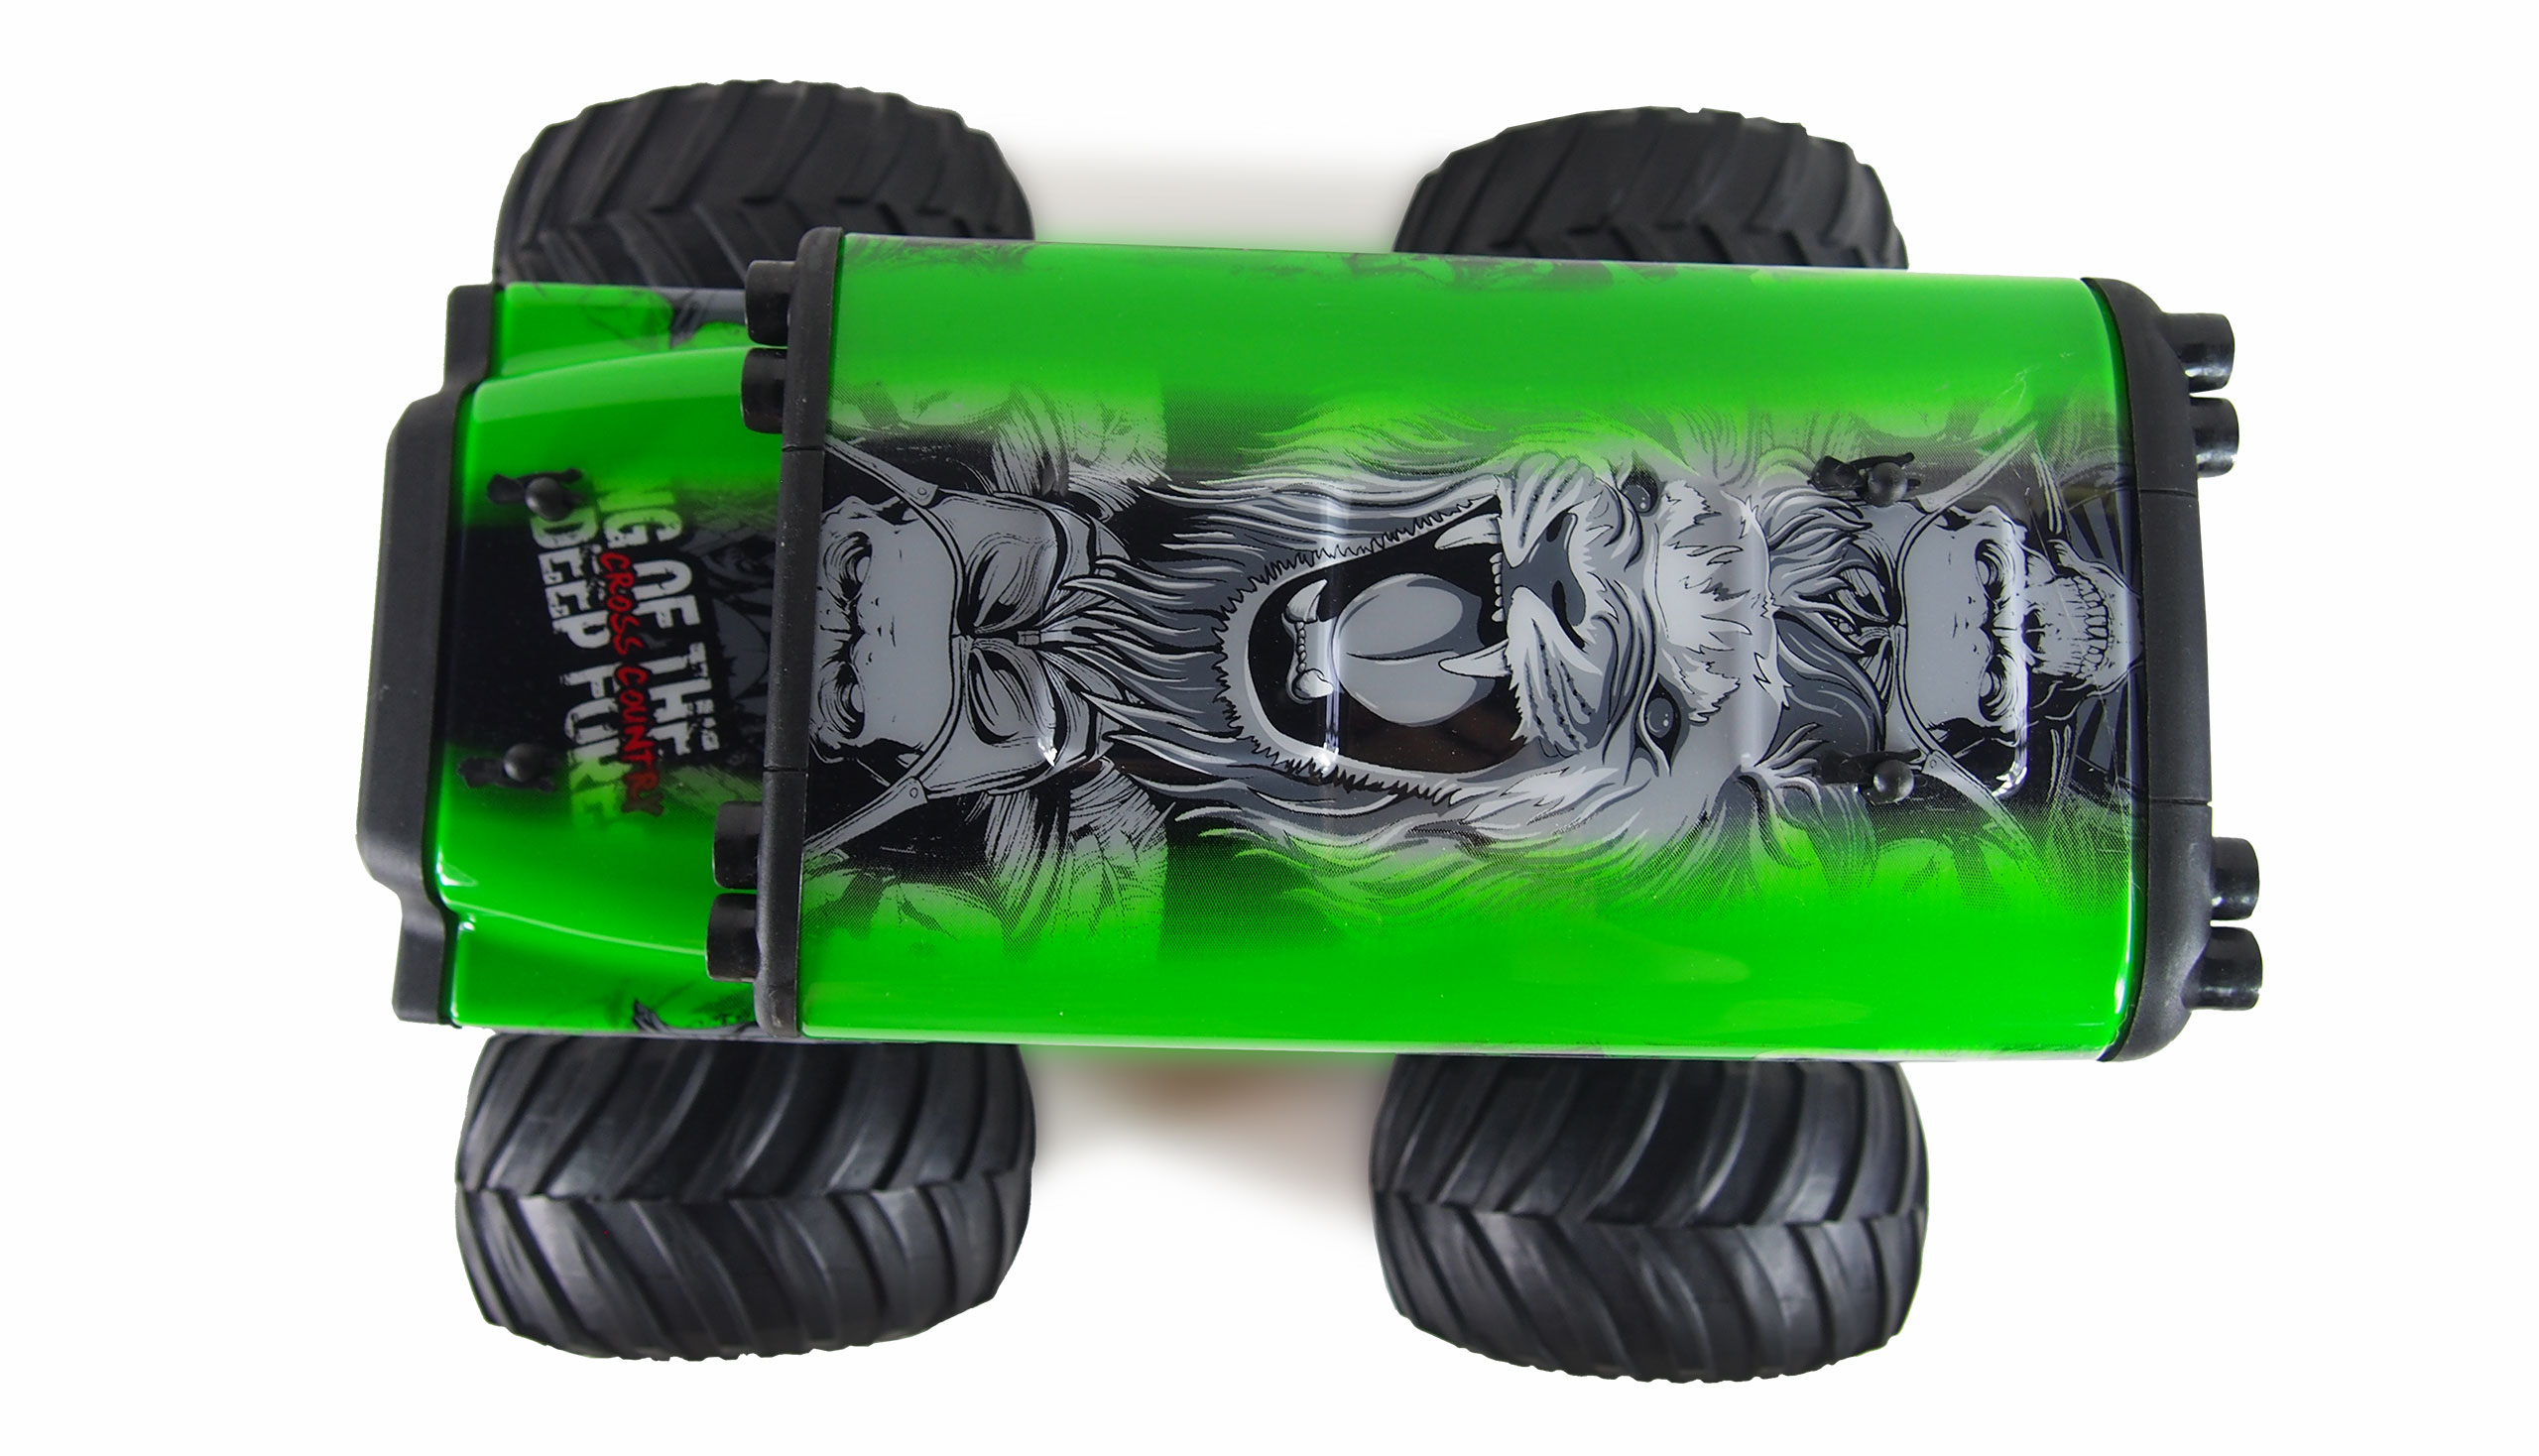 Crazy Truck 1:16 King of the Deep Forest, 2.4 GHz, 2WD, až 15 km/h, RTR